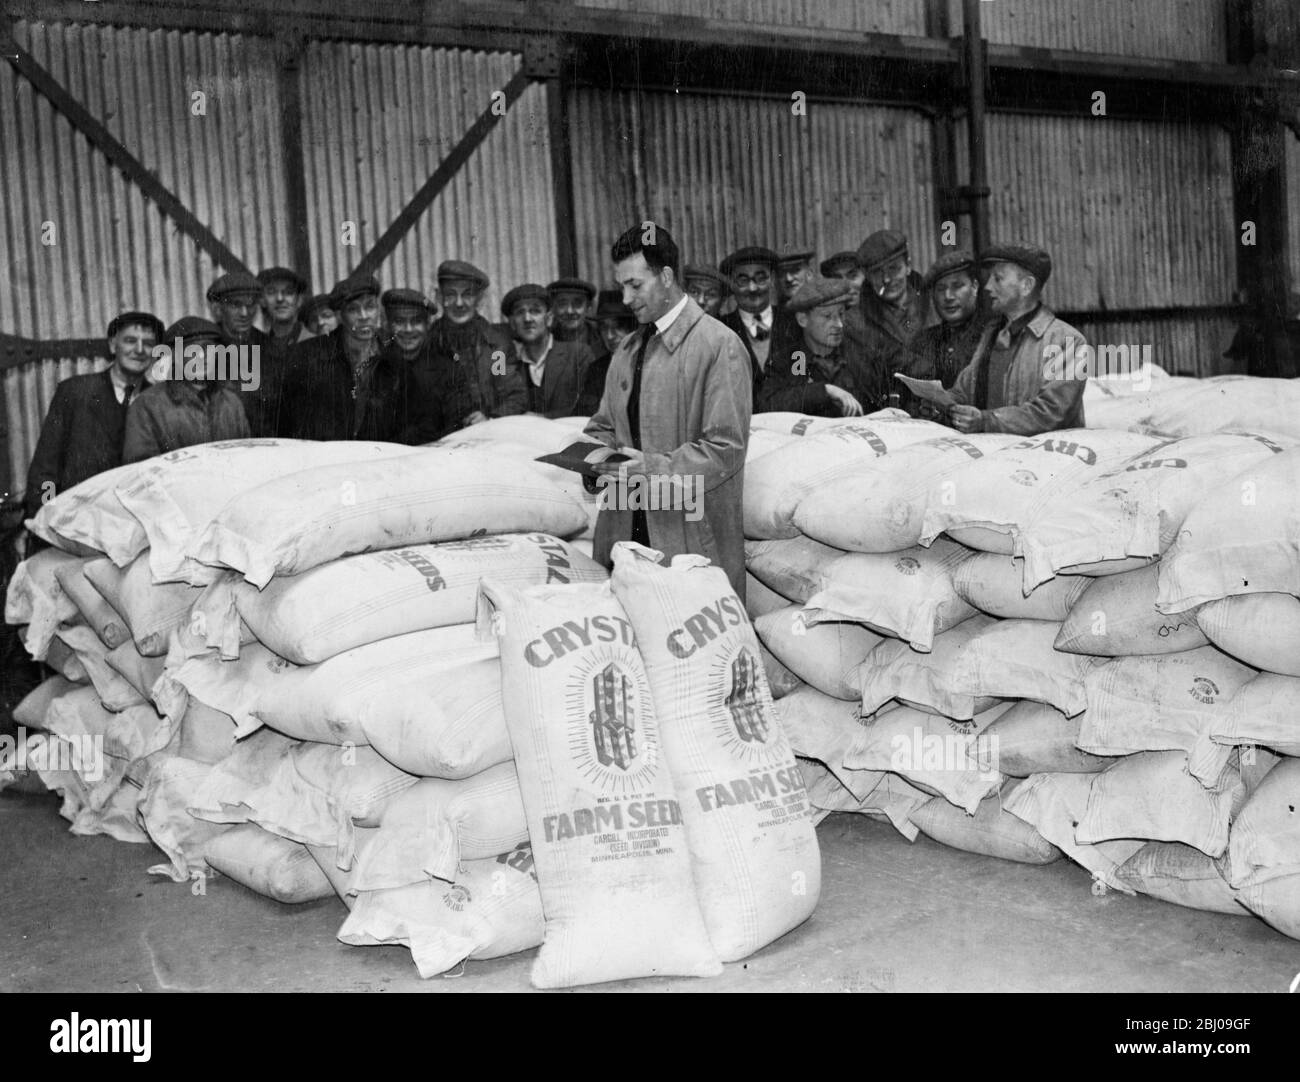 Dockers at Southampton were busy unloading a valuable cargo from the 85,000 ton liner Queen Elizabeth, which arrived from New York. 500 t of linseed was needed for sewing on 11,000 acres of recently flooded fenlands, and linseed is the most suitable crop. The Ministry of Food pointed out that the seed must be here by the beginning of May so the Conrad White Star owners gave this cargo top priority in place of the ship's normal luxury luggage. - Picture shows: the sacks of linseed are stacked in a shed at Southampton after being unloaded from the Queen Elizabeth. - 2 May 1947 Stock Photo